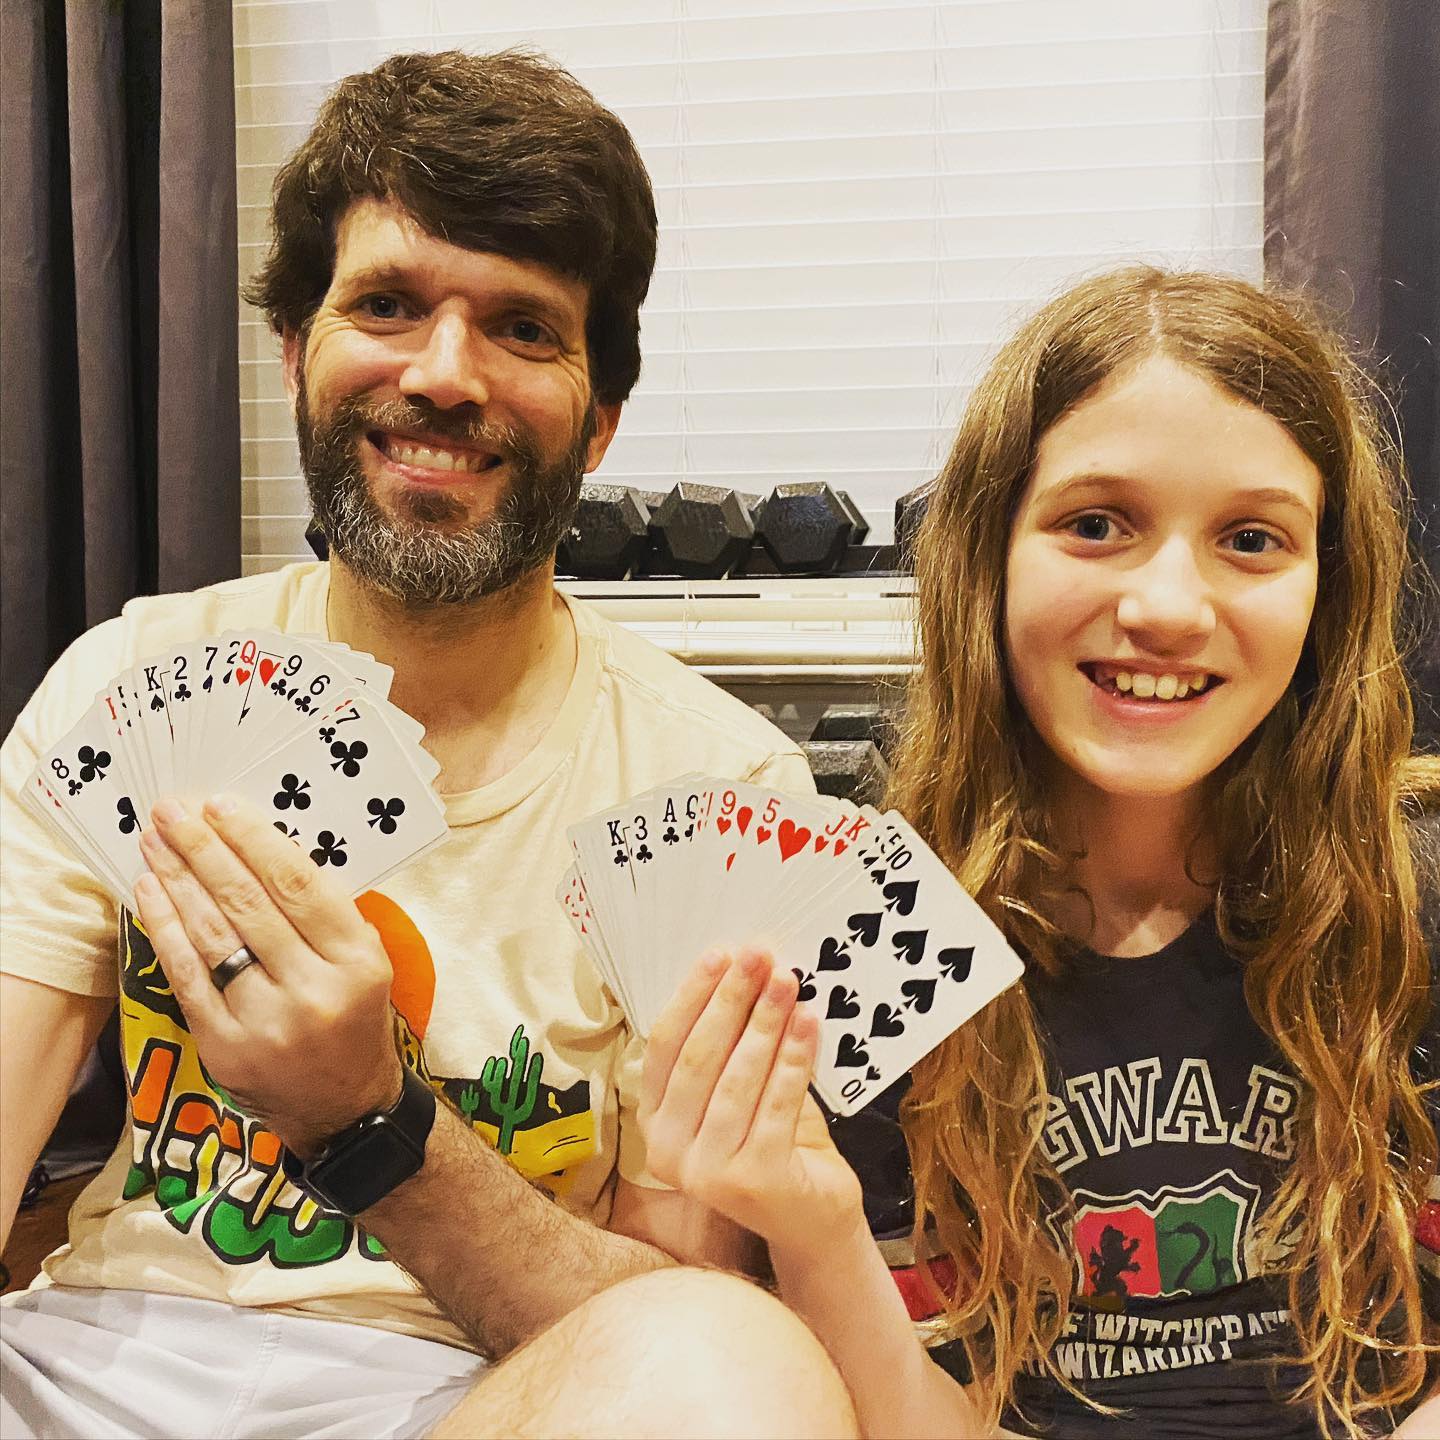 Tonight Sara taught me a new workout for partners that uses a deck of cards. Each person takes turns drawing a single card and you work through the entire deck. The suit determines what exercise you do and the number defines the reps. In total Sara did 69 sit-ups, 43 pushups, 47 squats, and 34 burpees. I did 25 sit-ups, 52 pushups, 47 squats, and 60 burpees. It was a really fun way to workout. #family #workout